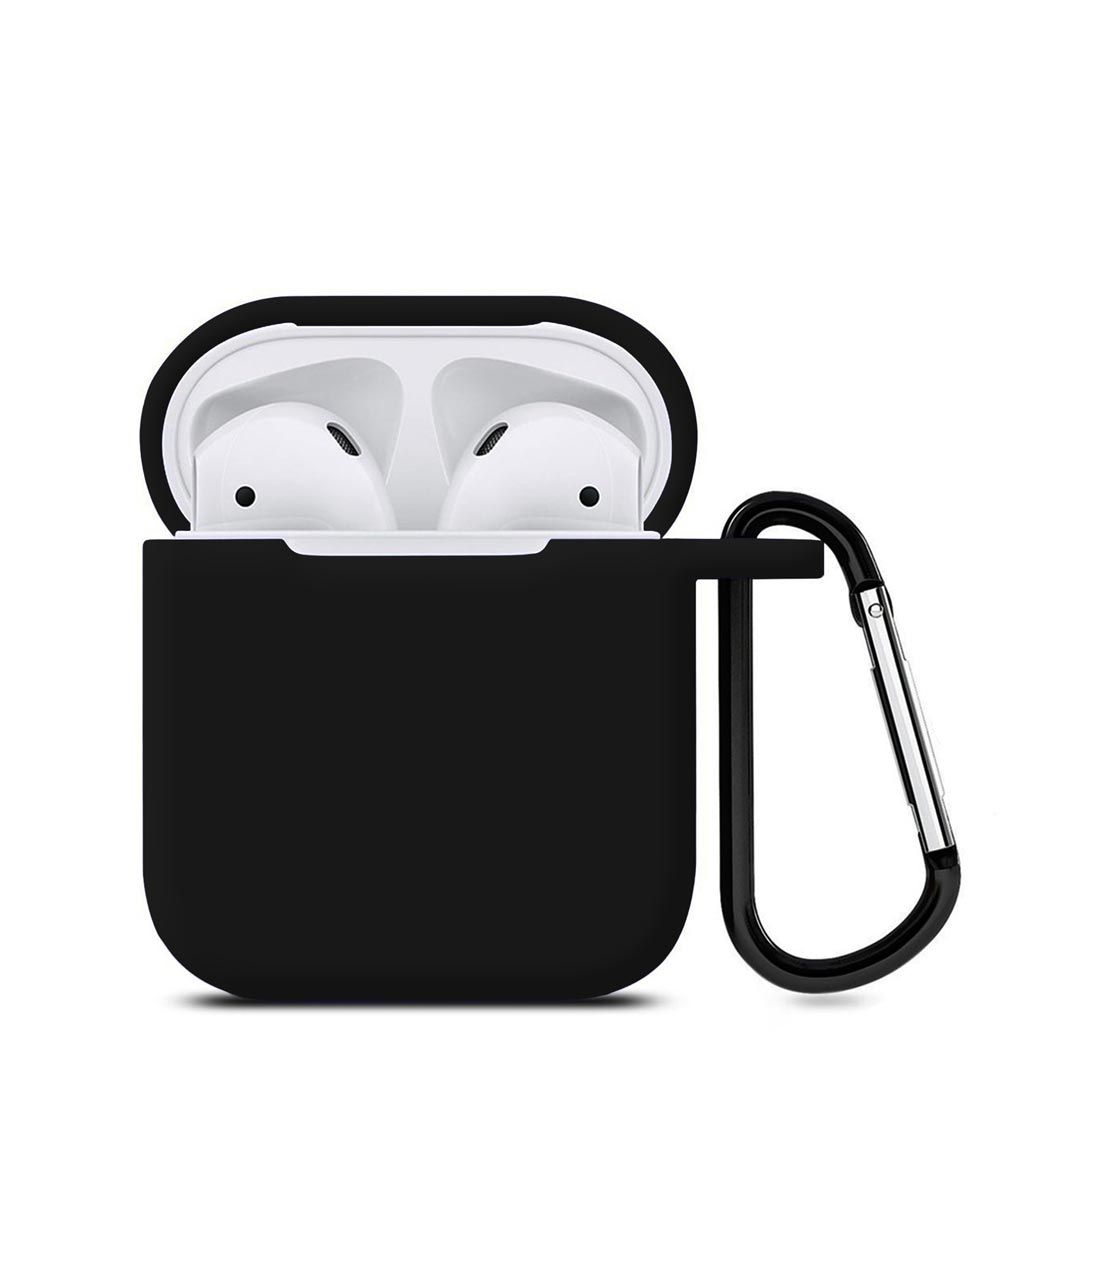 Buy Silicone Case Midnight Black - AirPods Case Airpod Cases Online